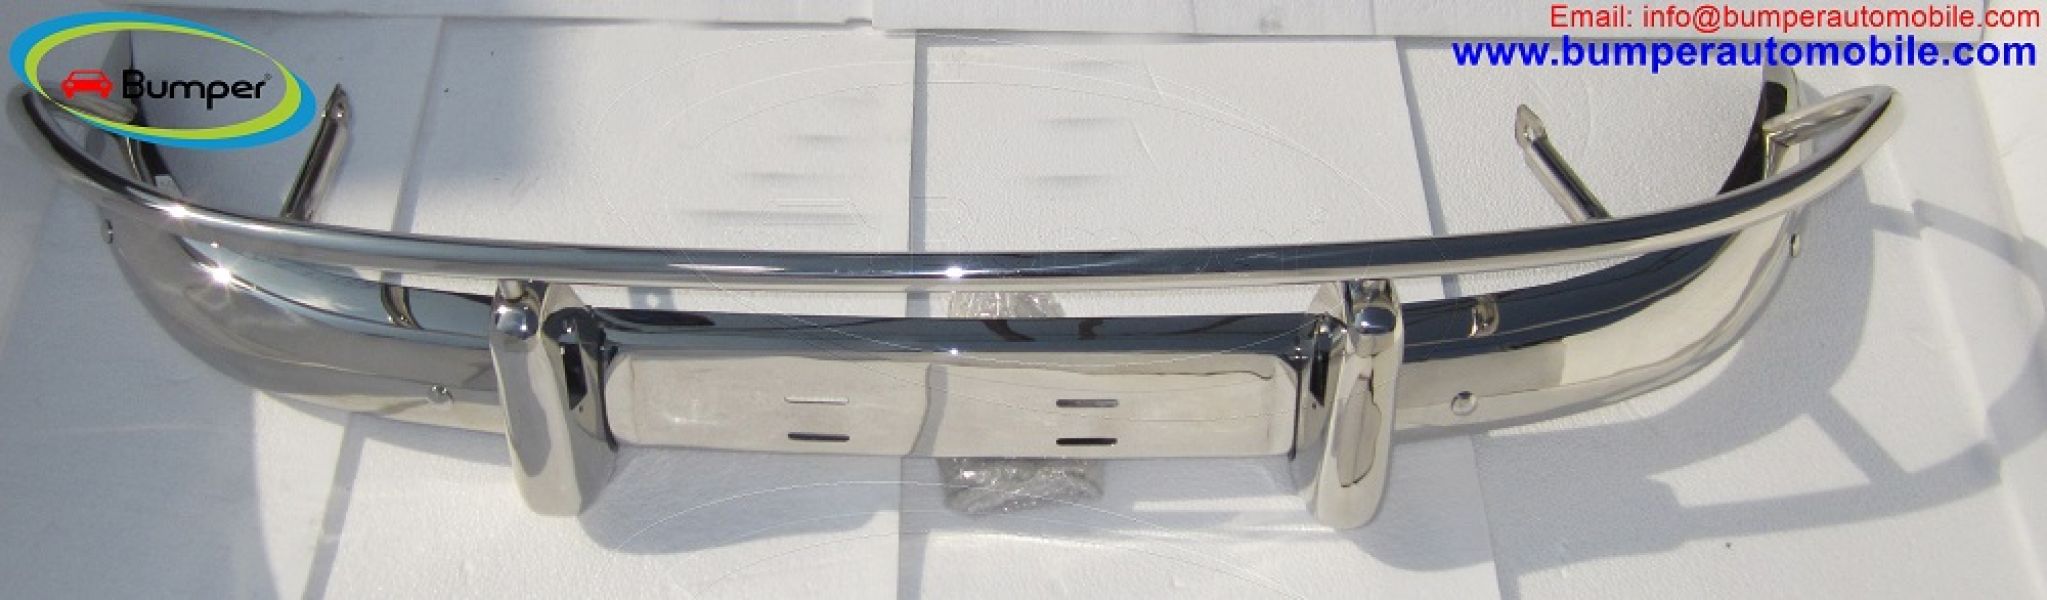 Volvo PV 544 US Front and Back bumper